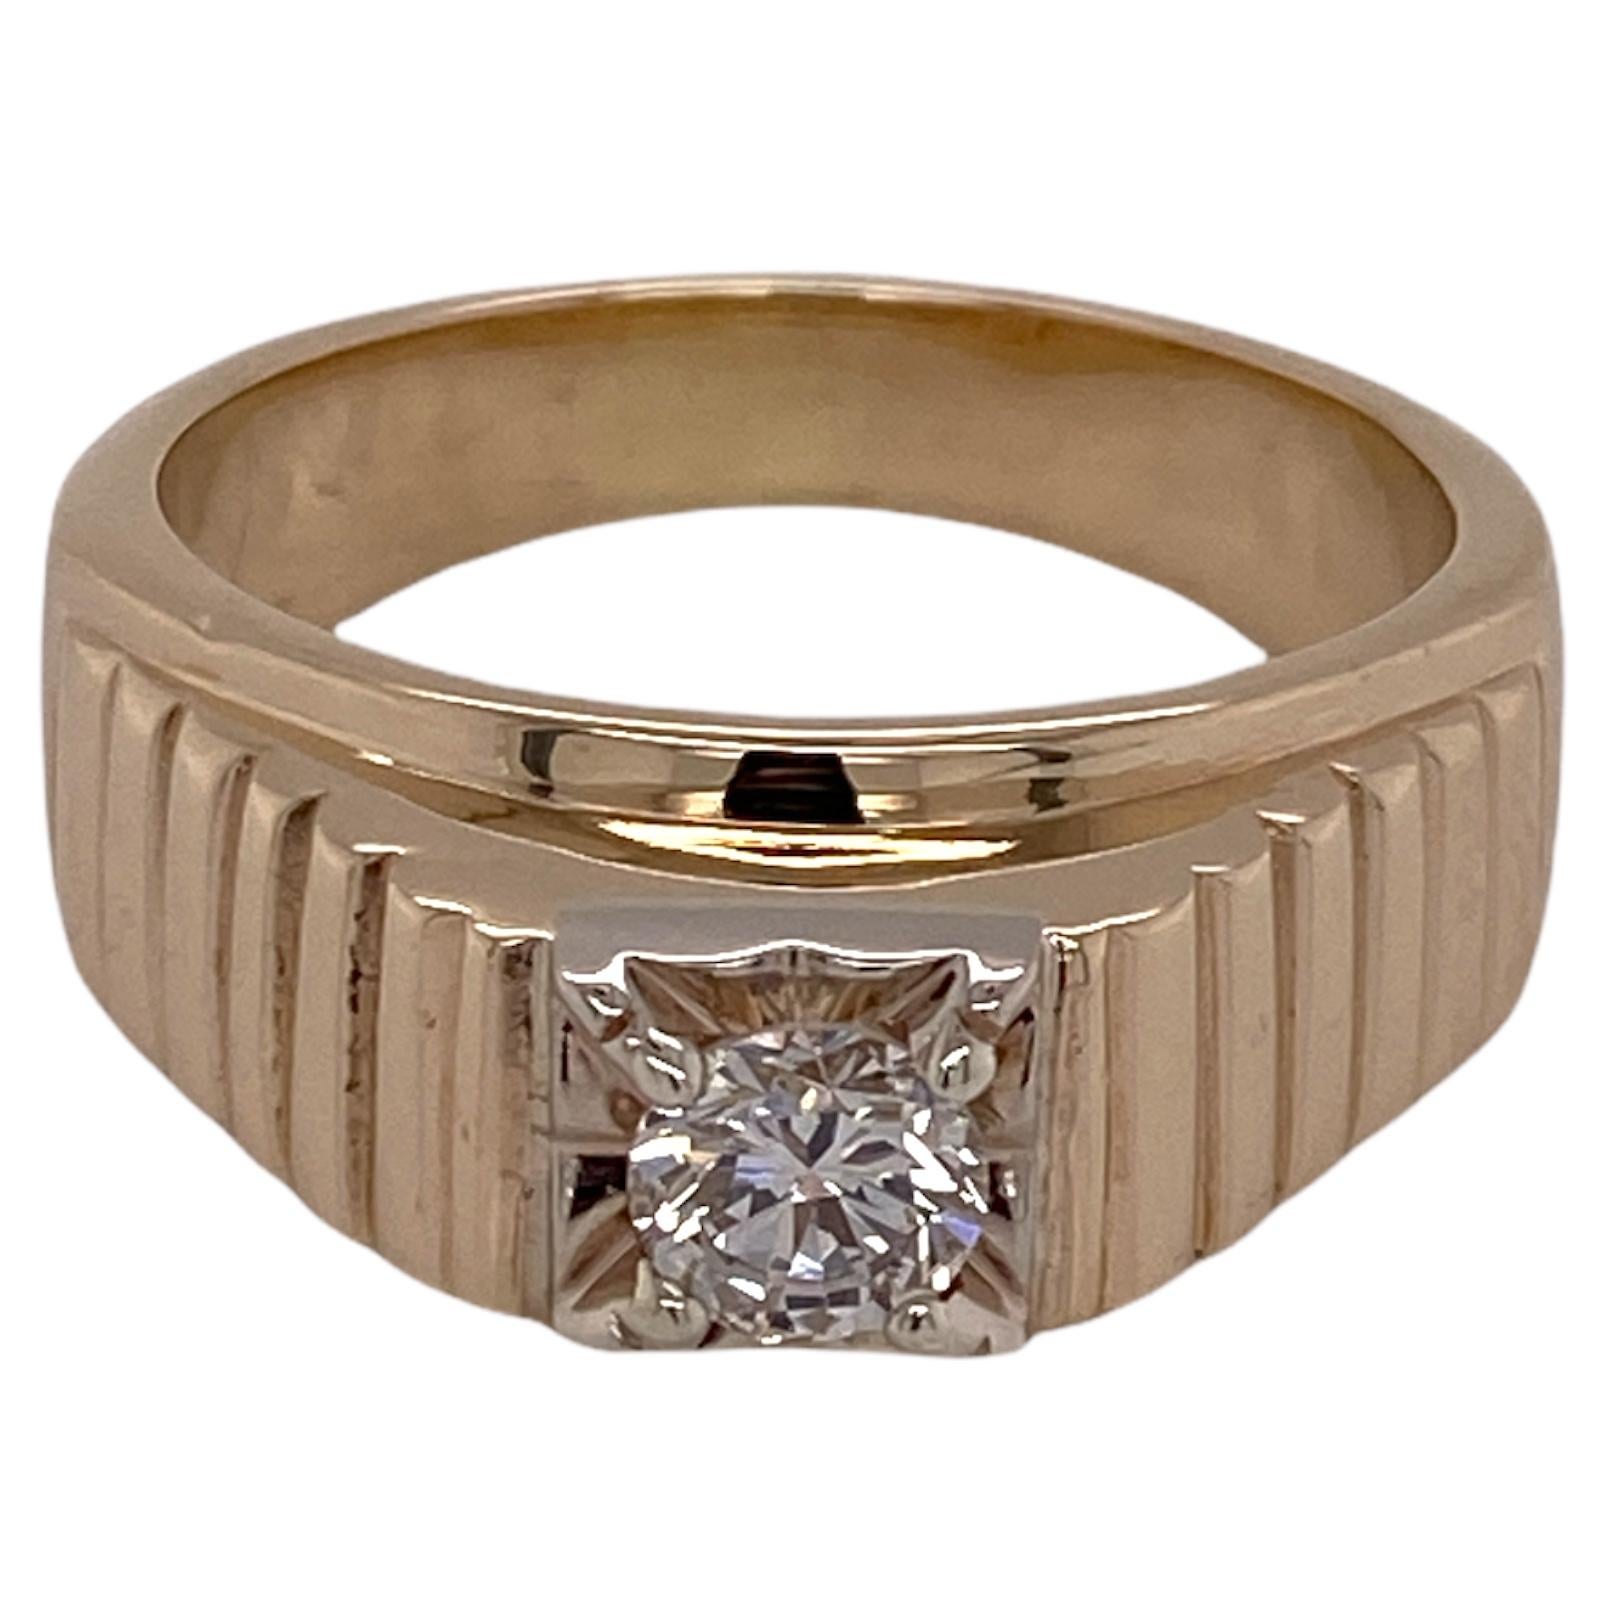 Men's solitaire diamond ring fashioned in 14 karat yellow gold. The ribbed men's ring features an approximately .65 carat round brilliant cut diamond graded K color and SI1 clarity. The ring measures 10mm in width and is currently size 12.5 (can be